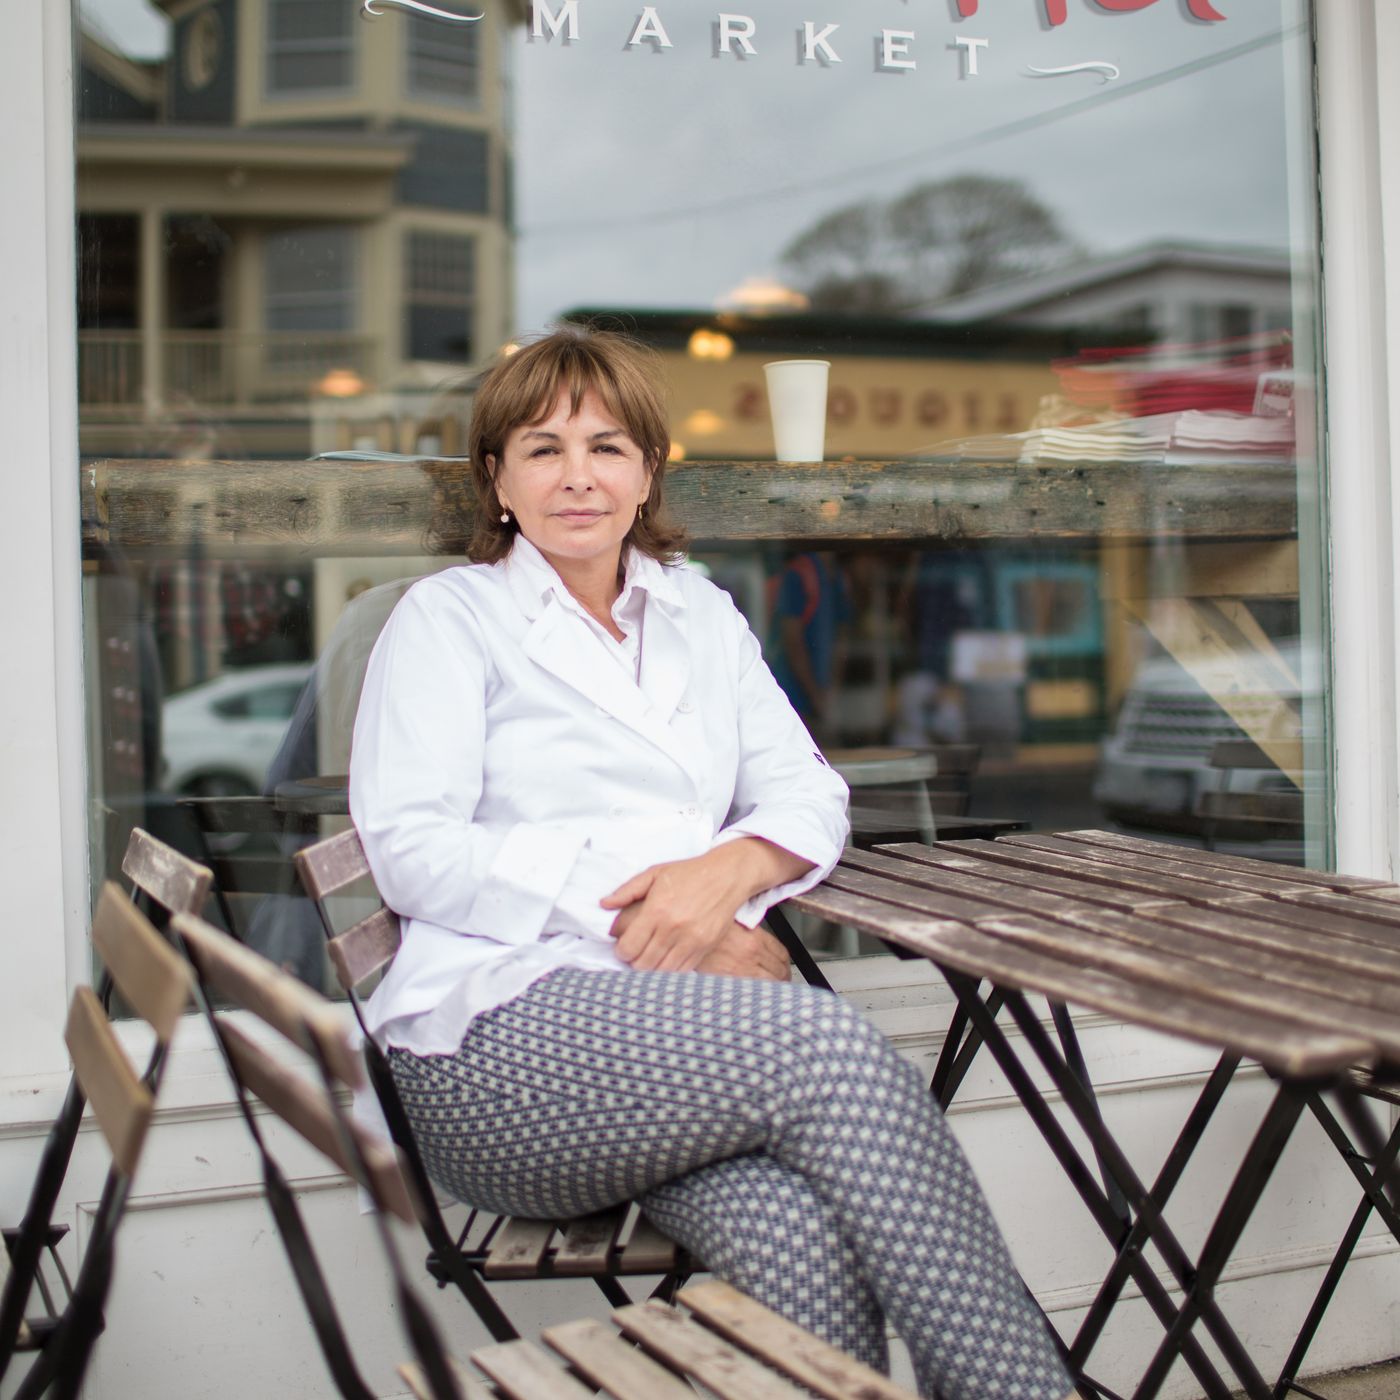 Shelter Island Bakery Owner Marie Eiffel Is Accused of Abuse pic photo